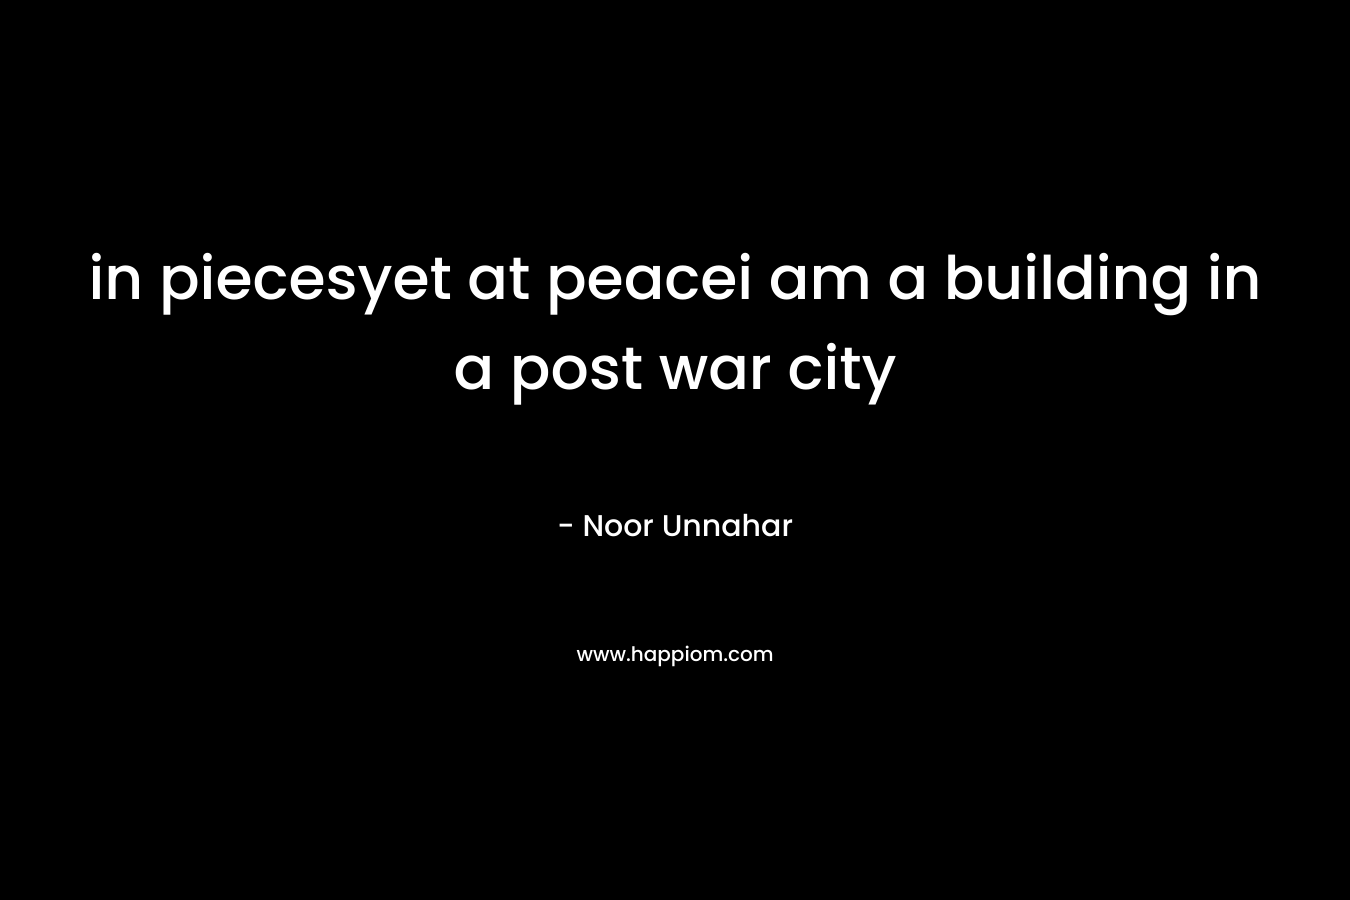 in piecesyet at peacei am a building in a post war city – Noor Unnahar